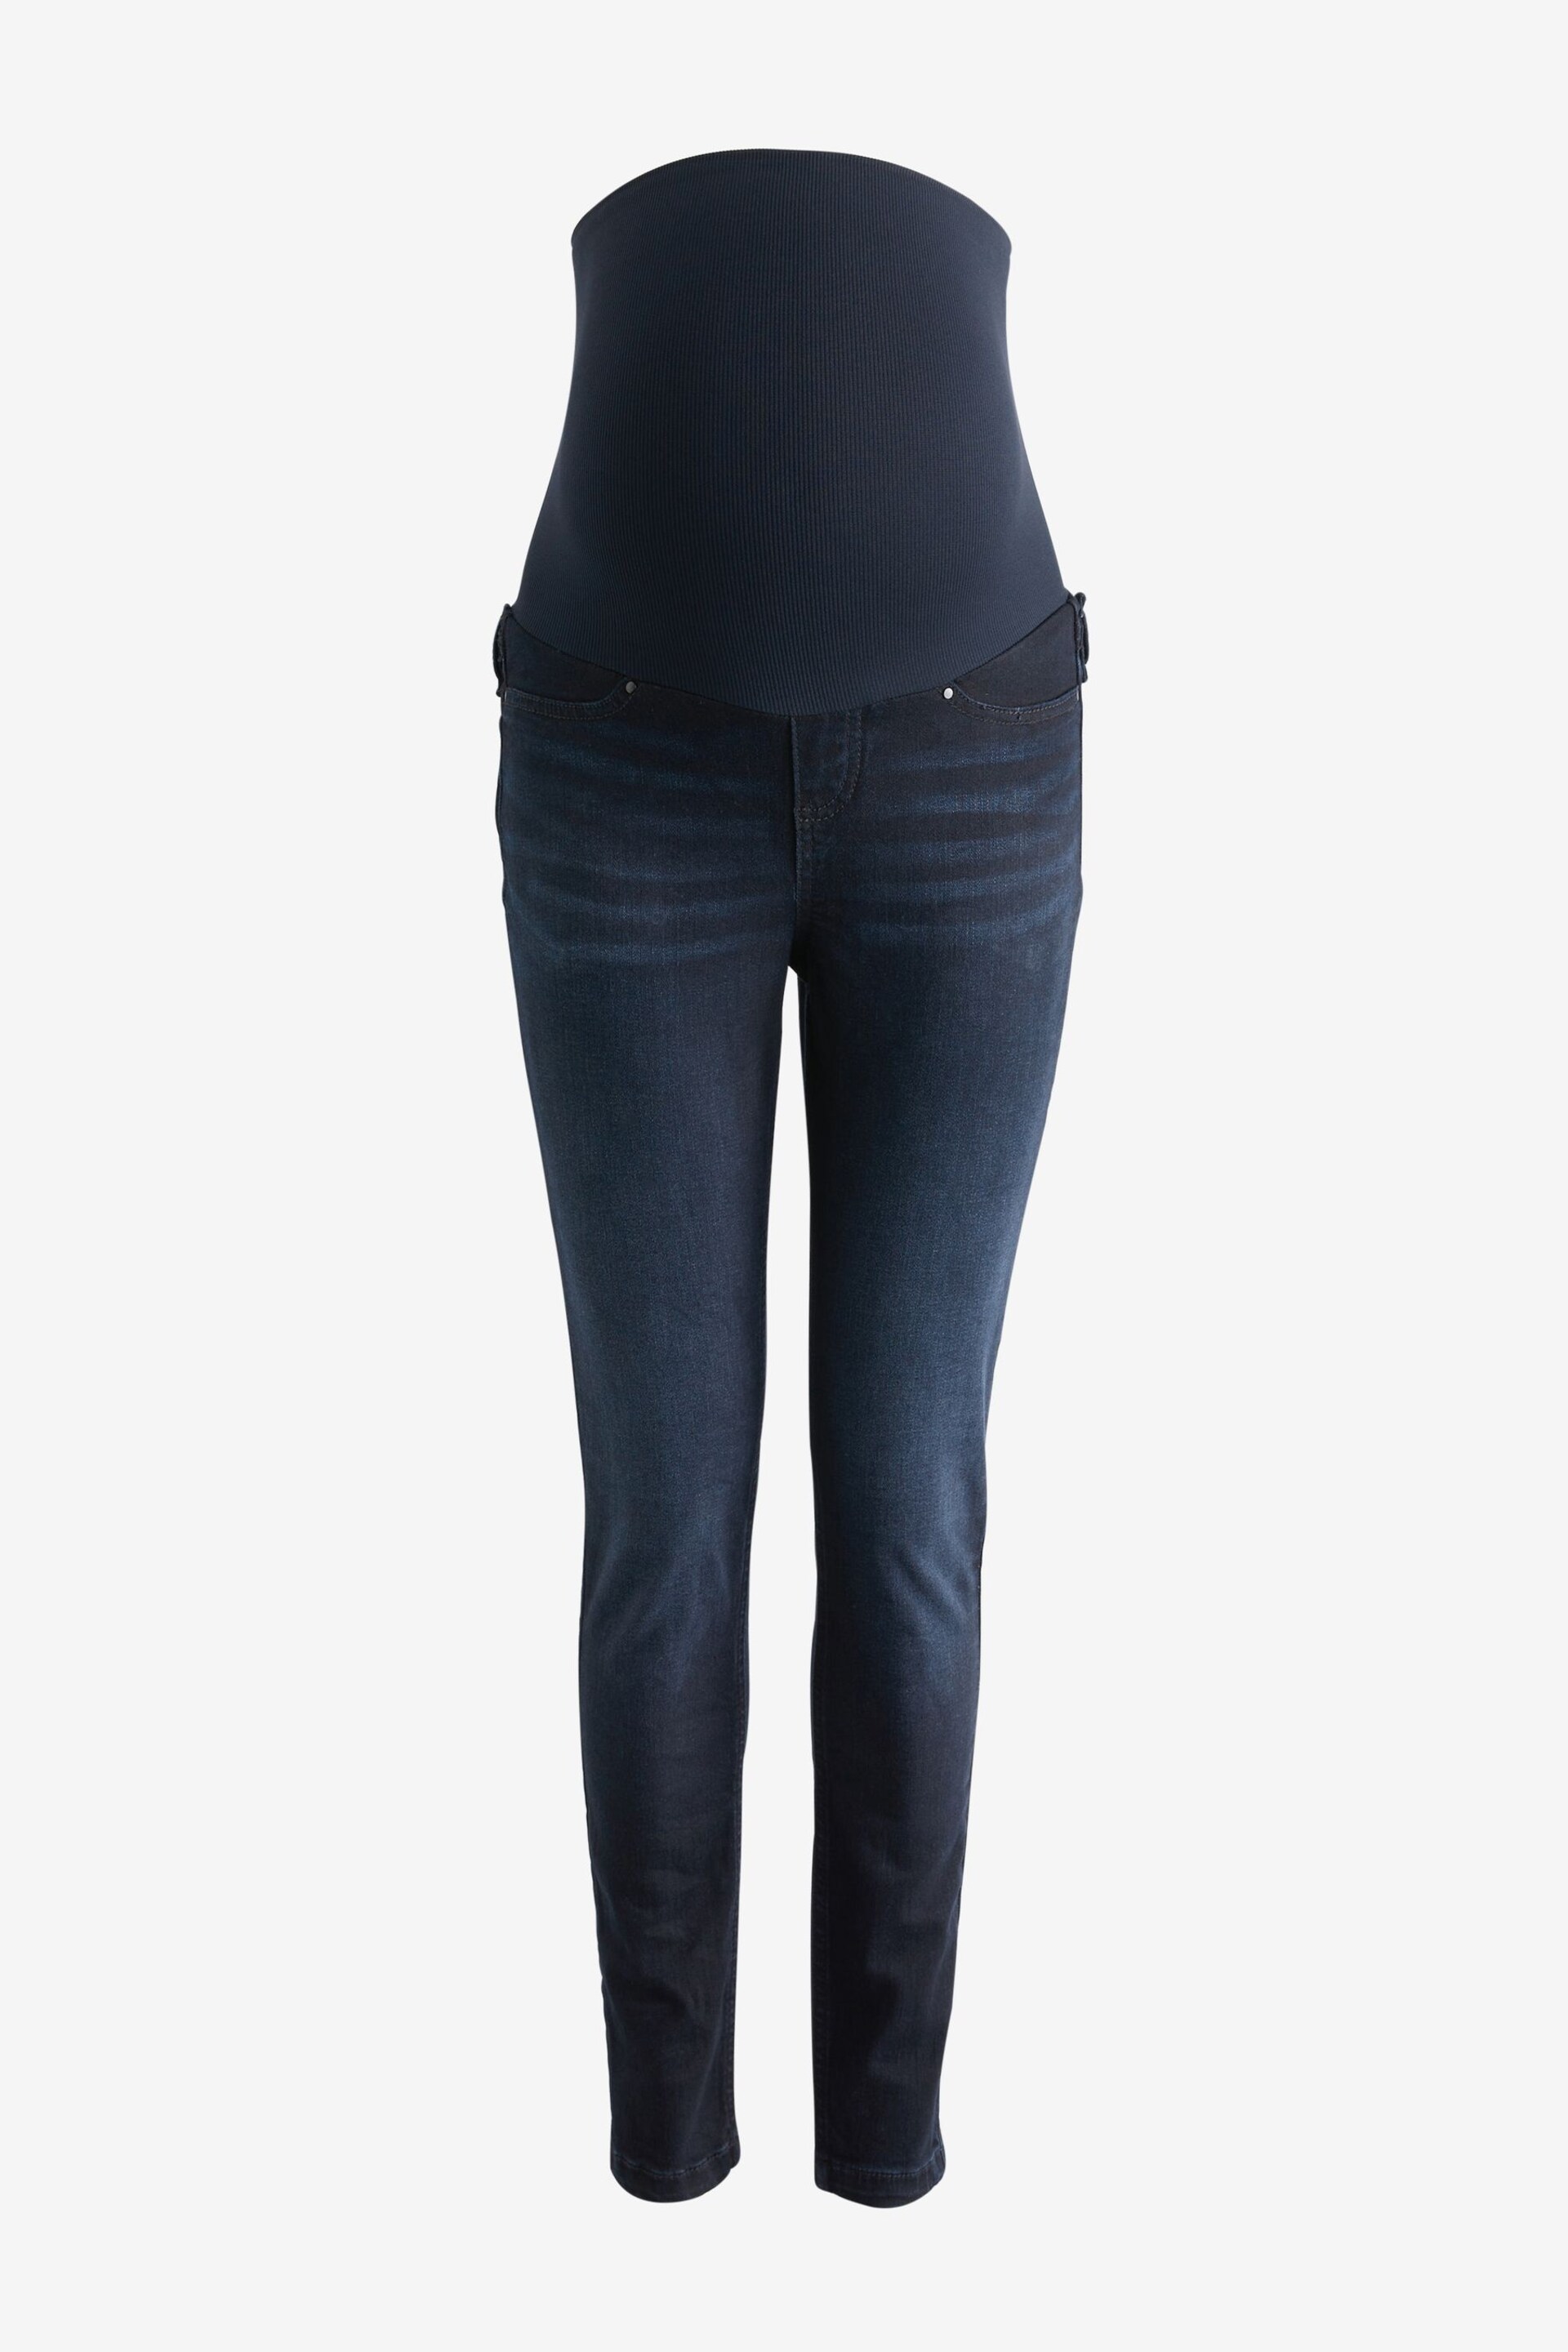 Seraphine Blue Andres-Skinny Ob Post Mat - Image 11 of 12